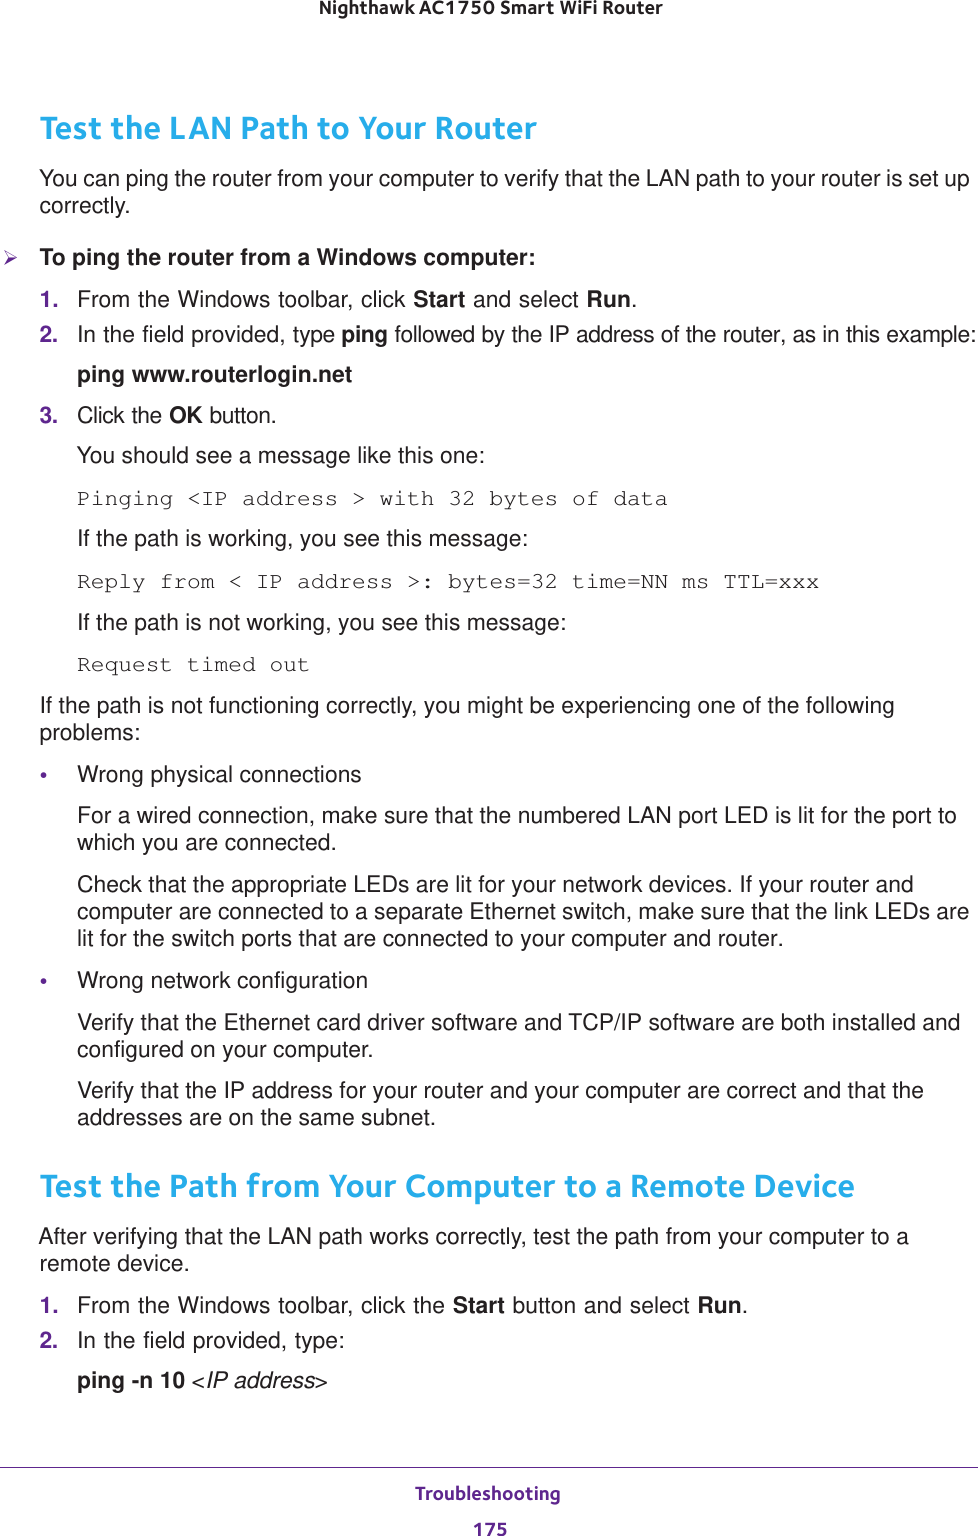 Troubleshooting 175 Nighthawk AC1750 Smart WiFi RouterTest the LAN Path to Your RouterYou can ping the router from your computer to verify that the LAN path to your router is set up correctly.To ping the router from a Windows computer:1.  From the Windows toolbar, click Start and select Run.2.  In the field provided, type ping followed by the IP address of the router, as in this example:ping www.routerlogin.net3.  Click the OK button.You should see a message like this one:Pinging &lt;IP address &gt; with 32 bytes of dataIf the path is working, you see this message:Reply from &lt; IP address &gt;: bytes=32 time=NN ms TTL=xxxIf the path is not working, you see this message:Request timed outIf the path is not functioning correctly, you might be experiencing one of the following problems:•Wrong physical connectionsFor a wired connection, make sure that the numbered LAN port LED is lit for the port to which you are connected.Check that the appropriate LEDs are lit for your network devices. If your router and computer are connected to a separate Ethernet switch, make sure that the link LEDs are lit for the switch ports that are connected to your computer and router.•Wrong network configurationVerify that the Ethernet card driver software and TCP/IP software are both installed and configured on your computer. Verify that the IP address for your router and your computer are correct and that the addresses are on the same subnet.Test the Path from Your Computer to a Remote DeviceAfter verifying that the LAN path works correctly, test the path from your computer to a remote device.1.  From the Windows toolbar, click the Start button and select Run.2.  In the field provided, type:ping -n 10 &lt;IP address&gt;